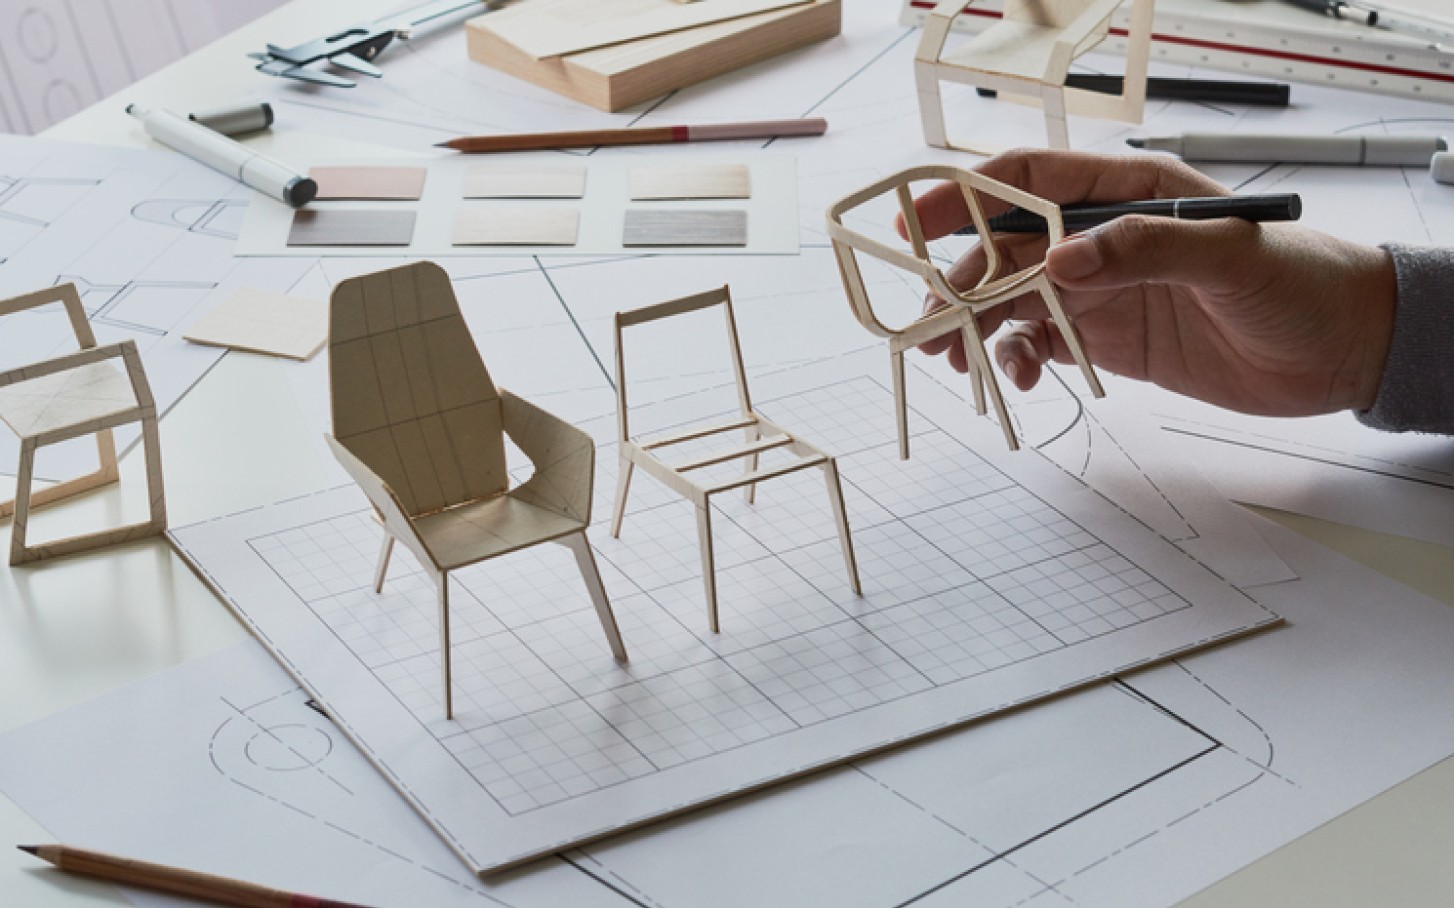 Miniature chair models in different designs